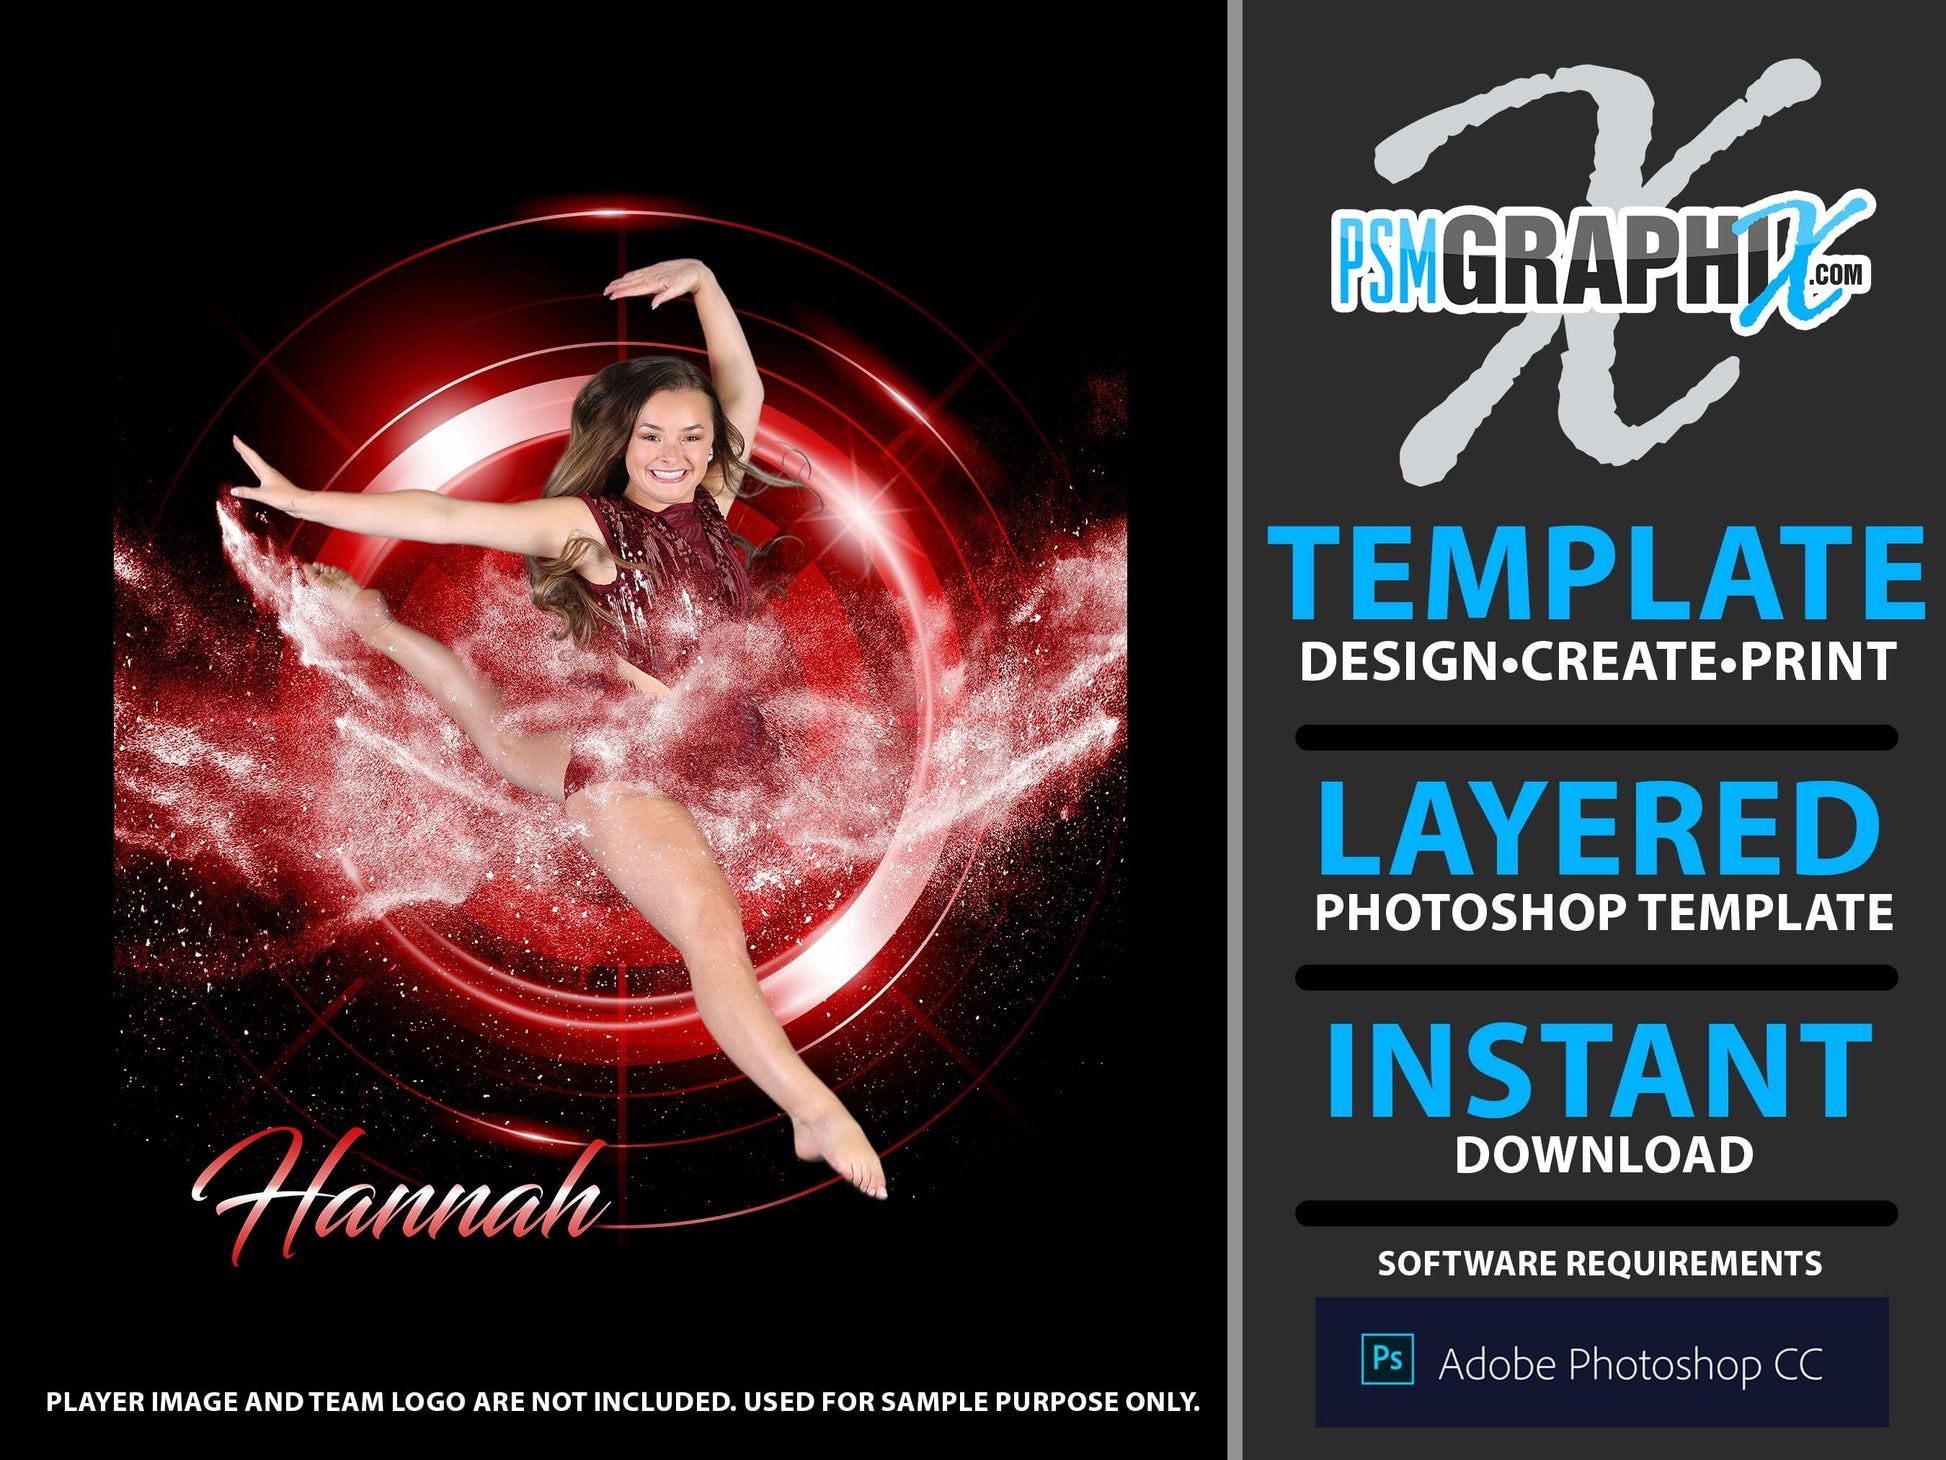 Target - Stage Series II - Vertical Photoshop Template-Photoshop Template - PSMGraphix